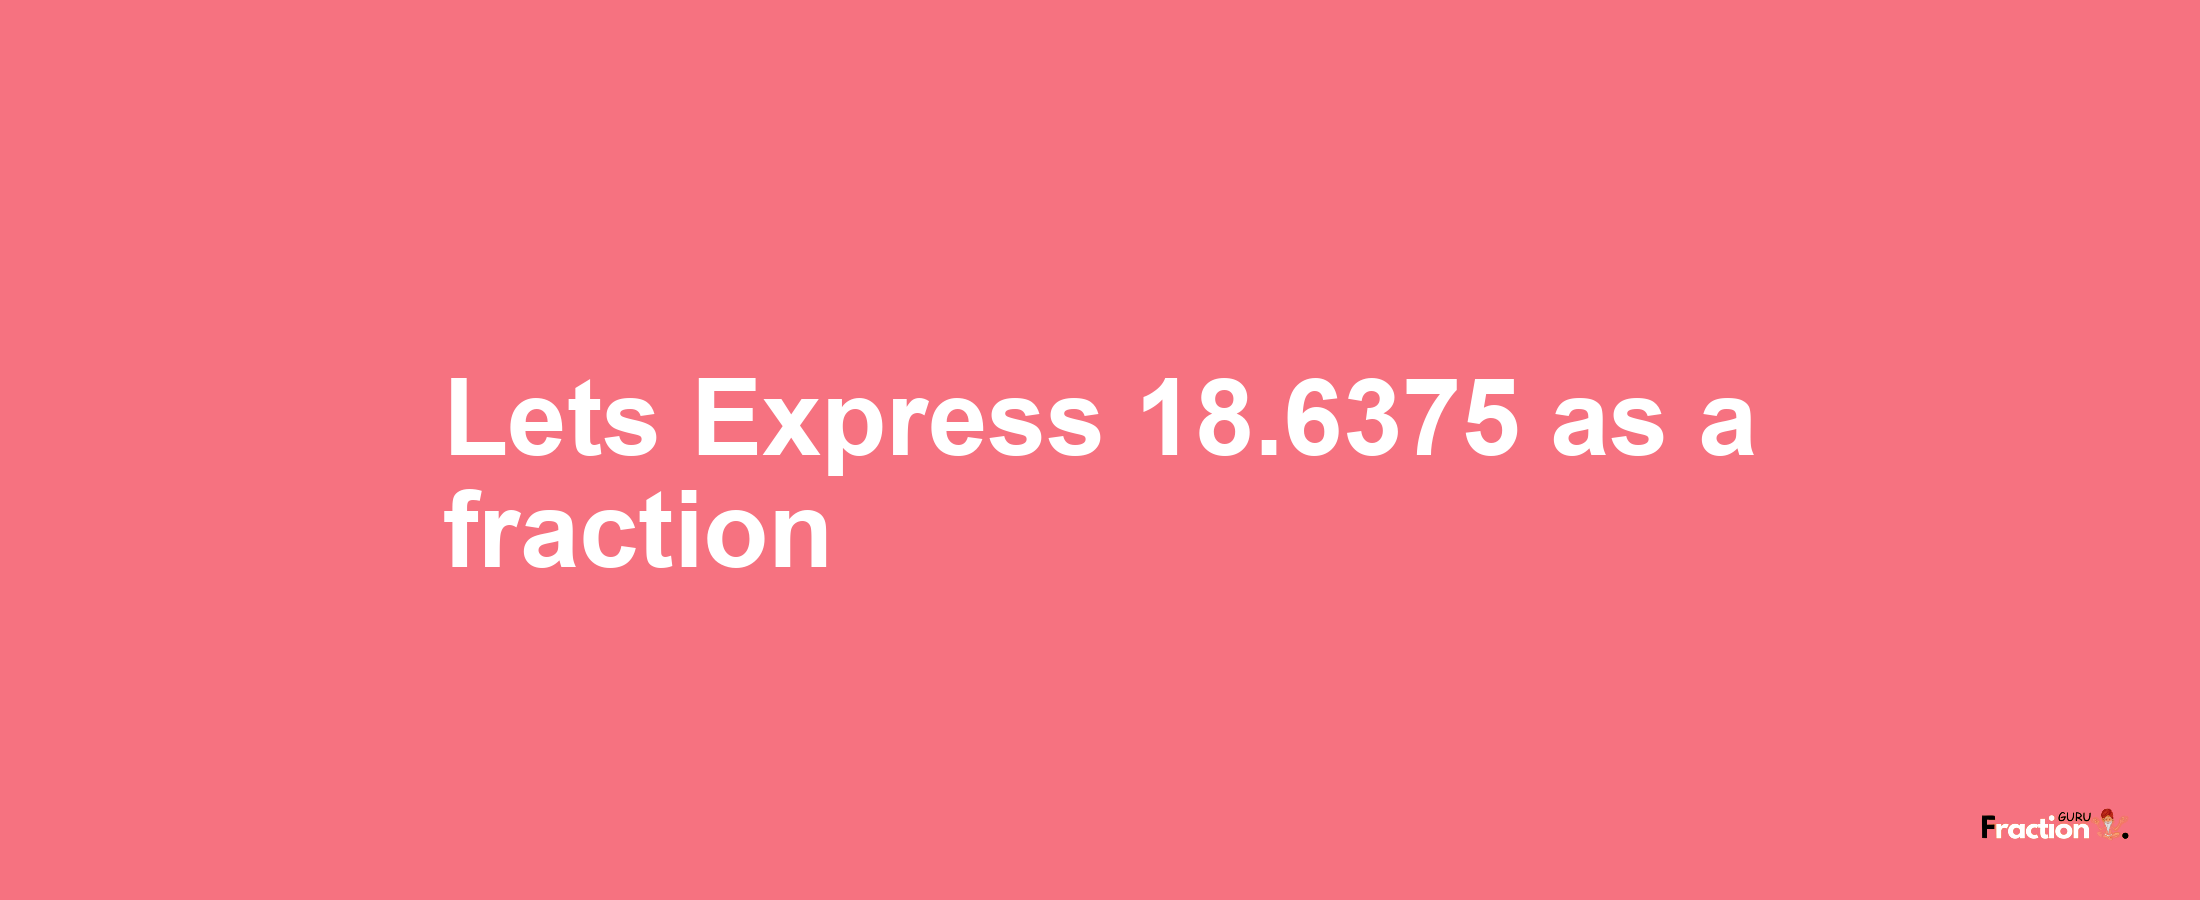 Lets Express 18.6375 as afraction